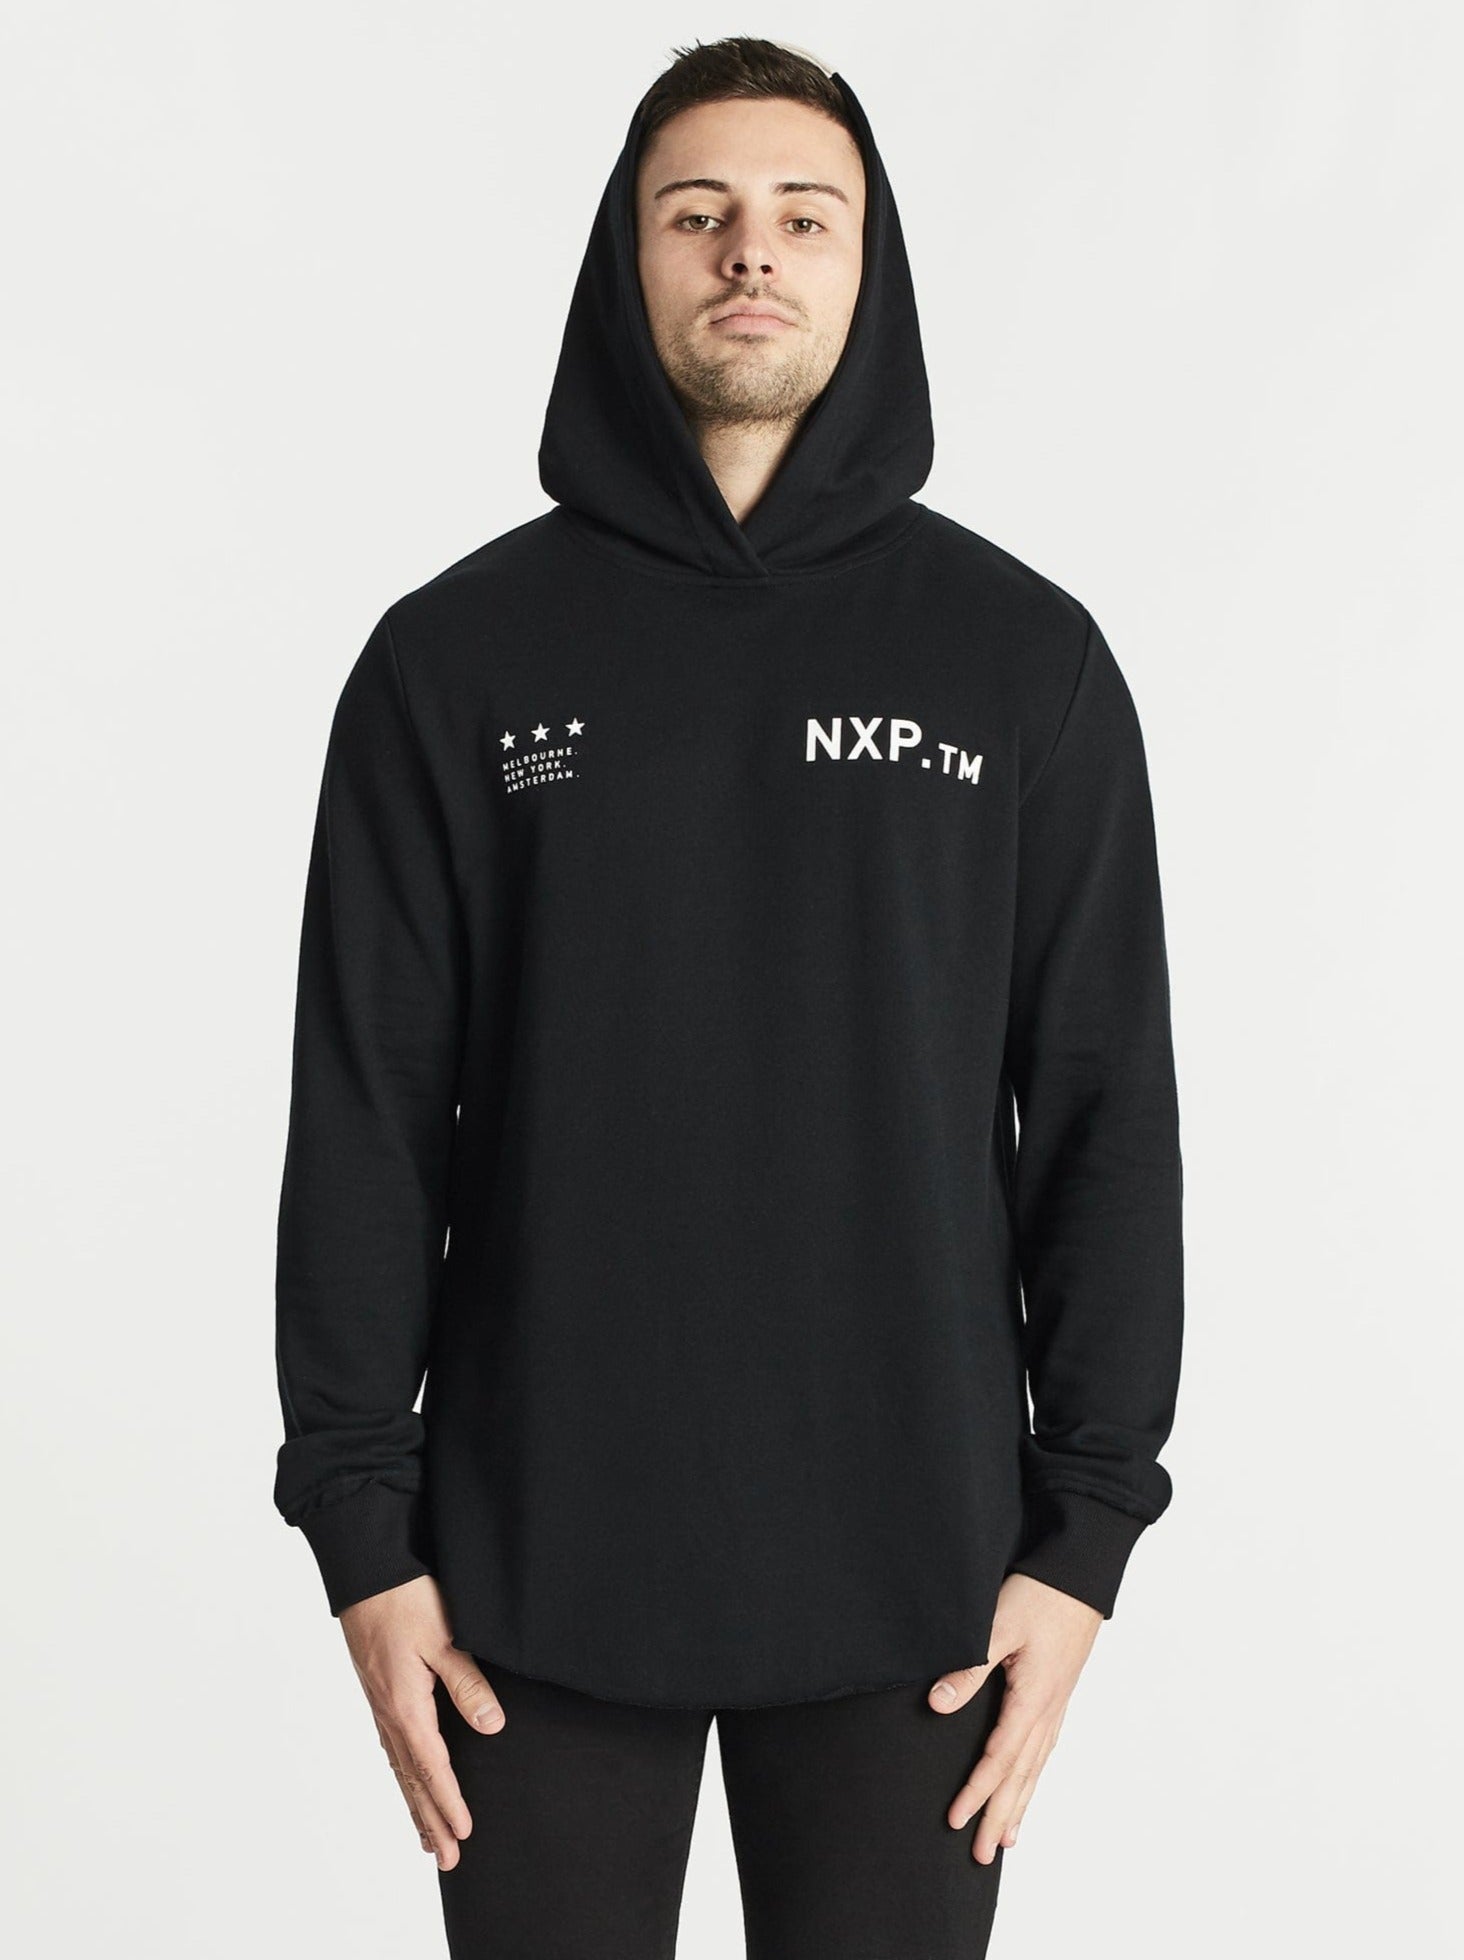 NXP Unclean Dual Curved Hooded Sweater - Jet Black